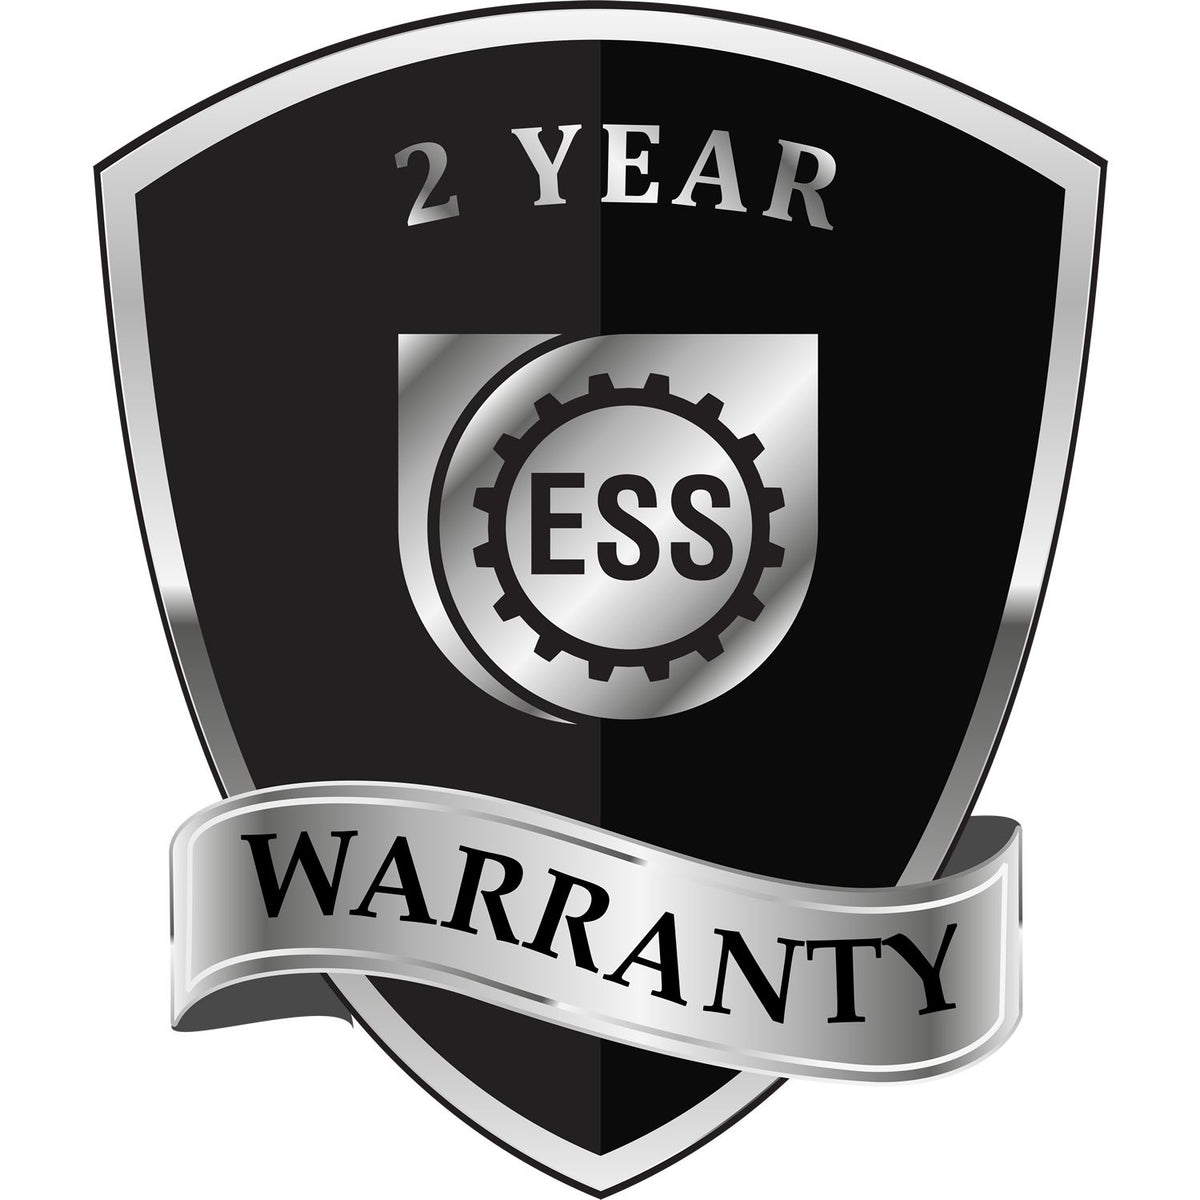 A badge or emblem showing a warranty icon for the South Dakota Engineer Desk Seal